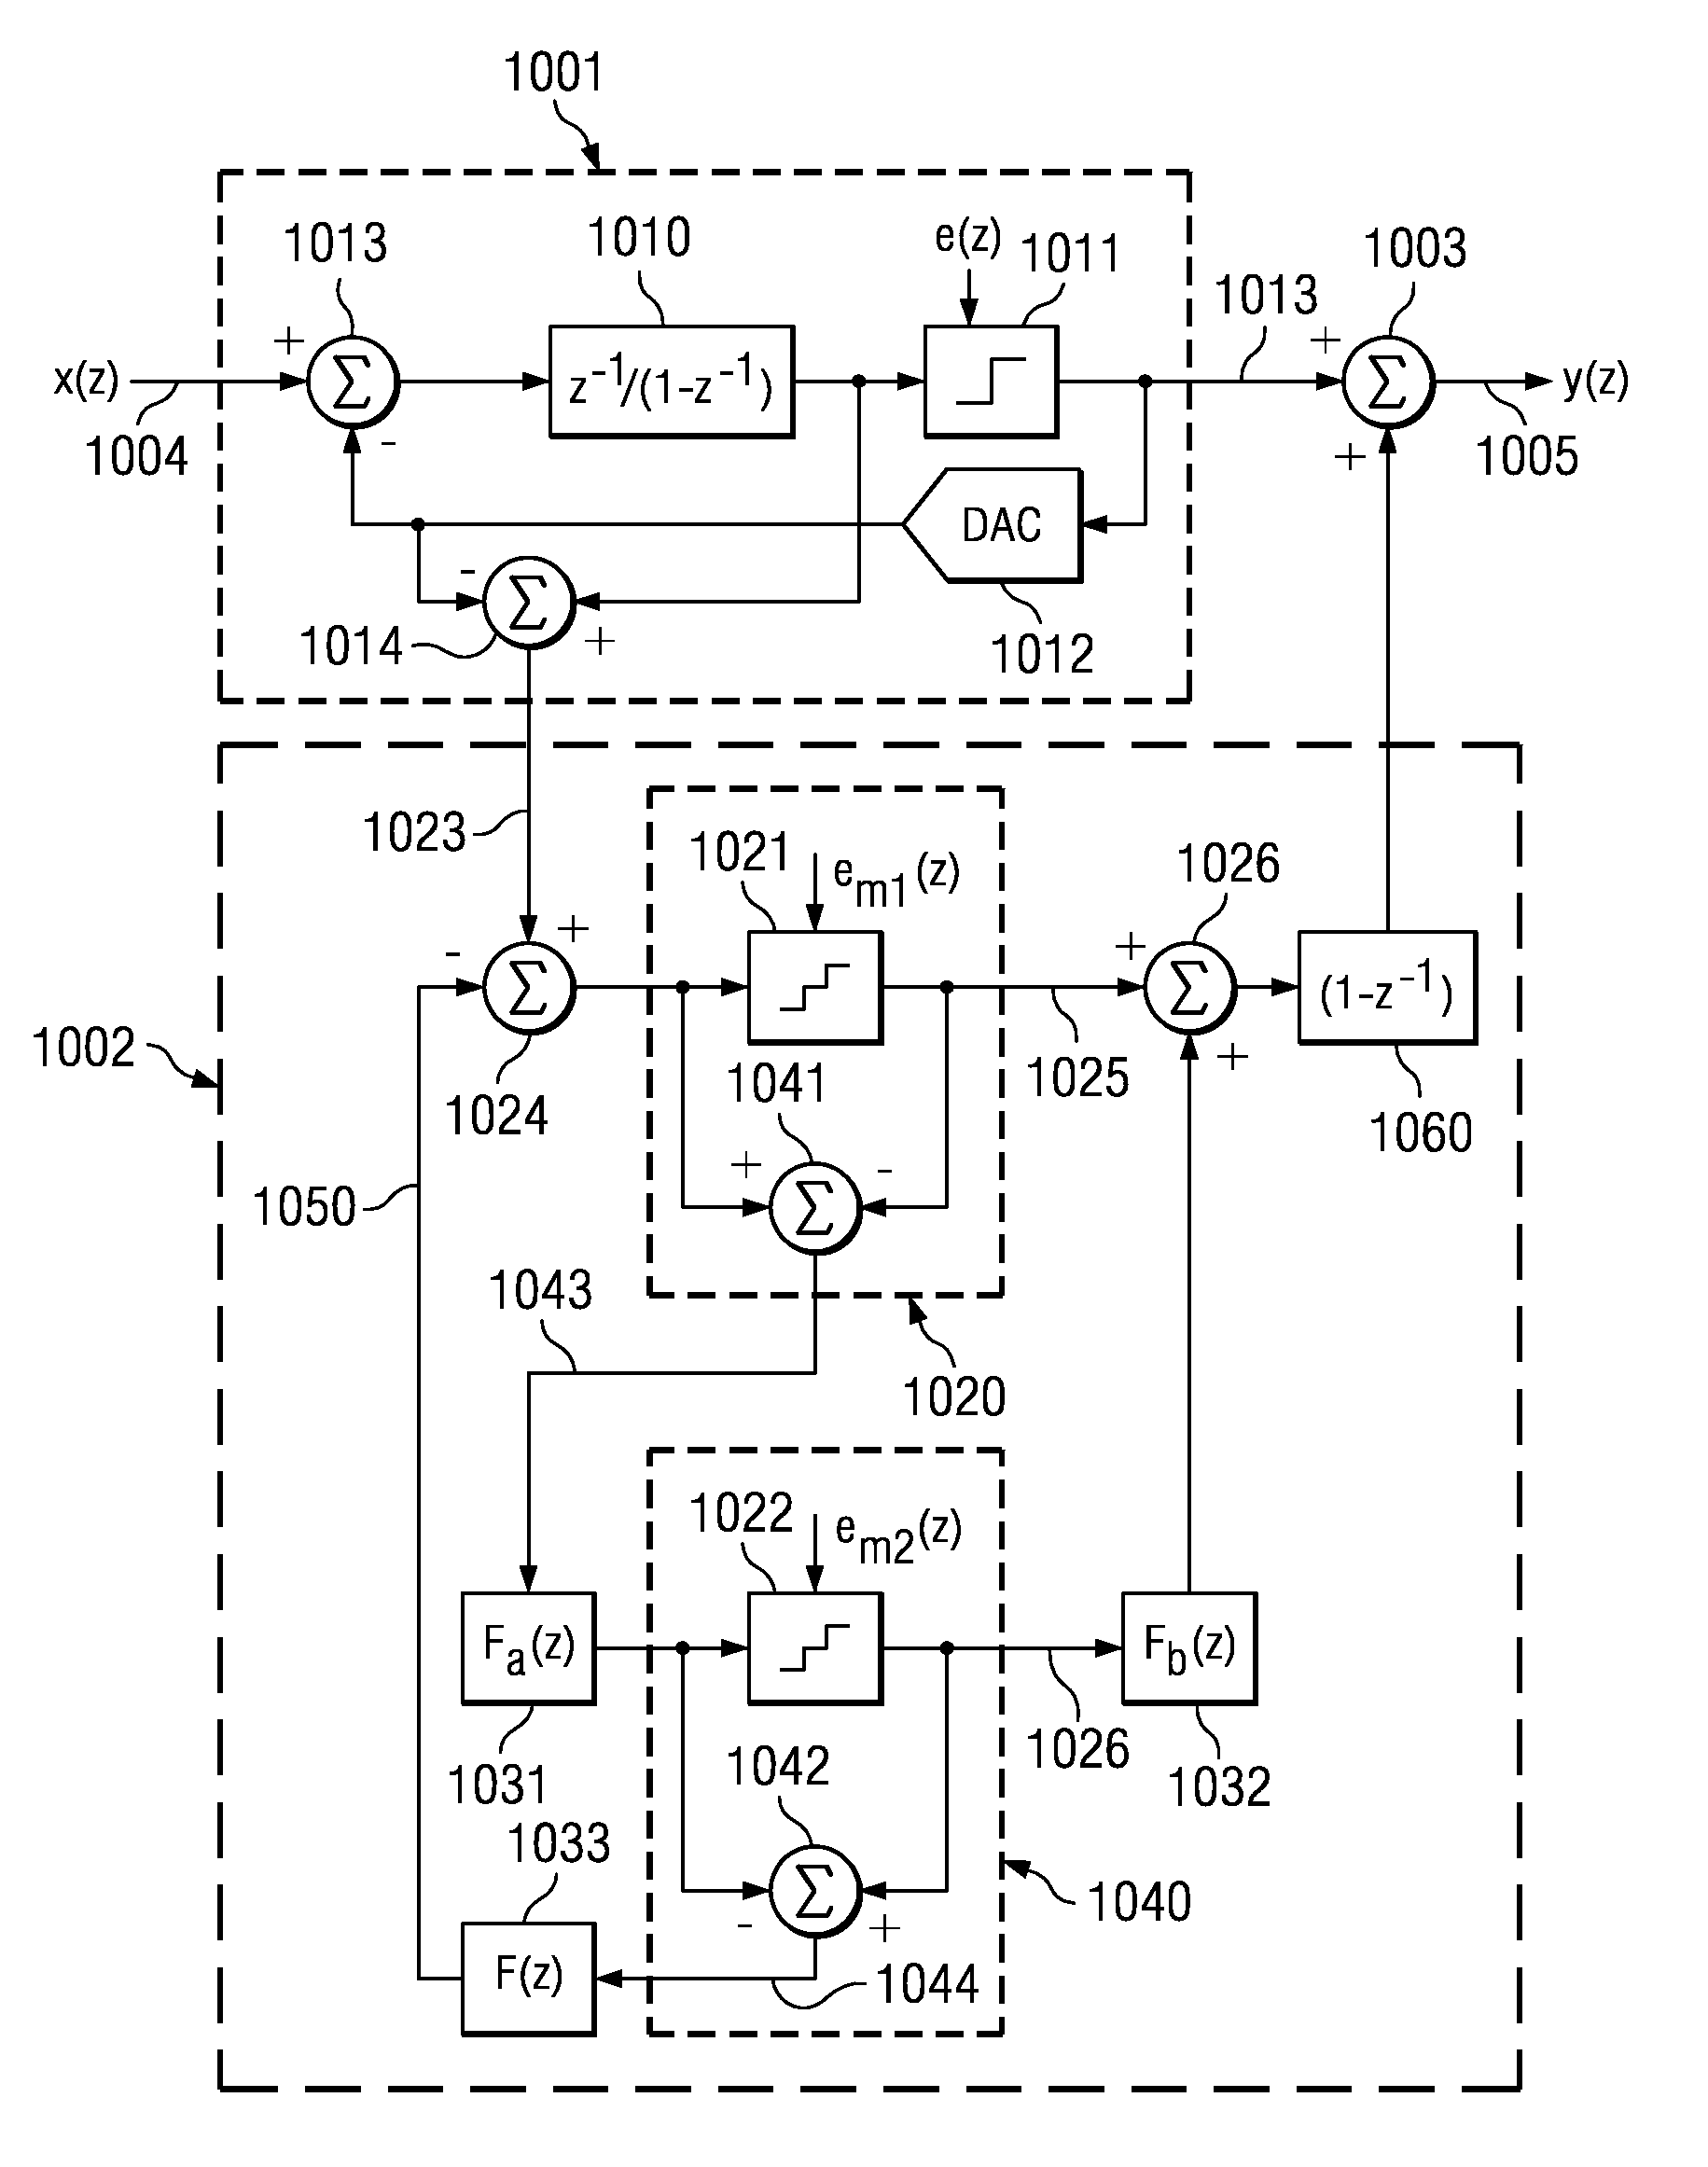 Delta-sigma analog-to-digital converter with pipelined multi-bit quantization